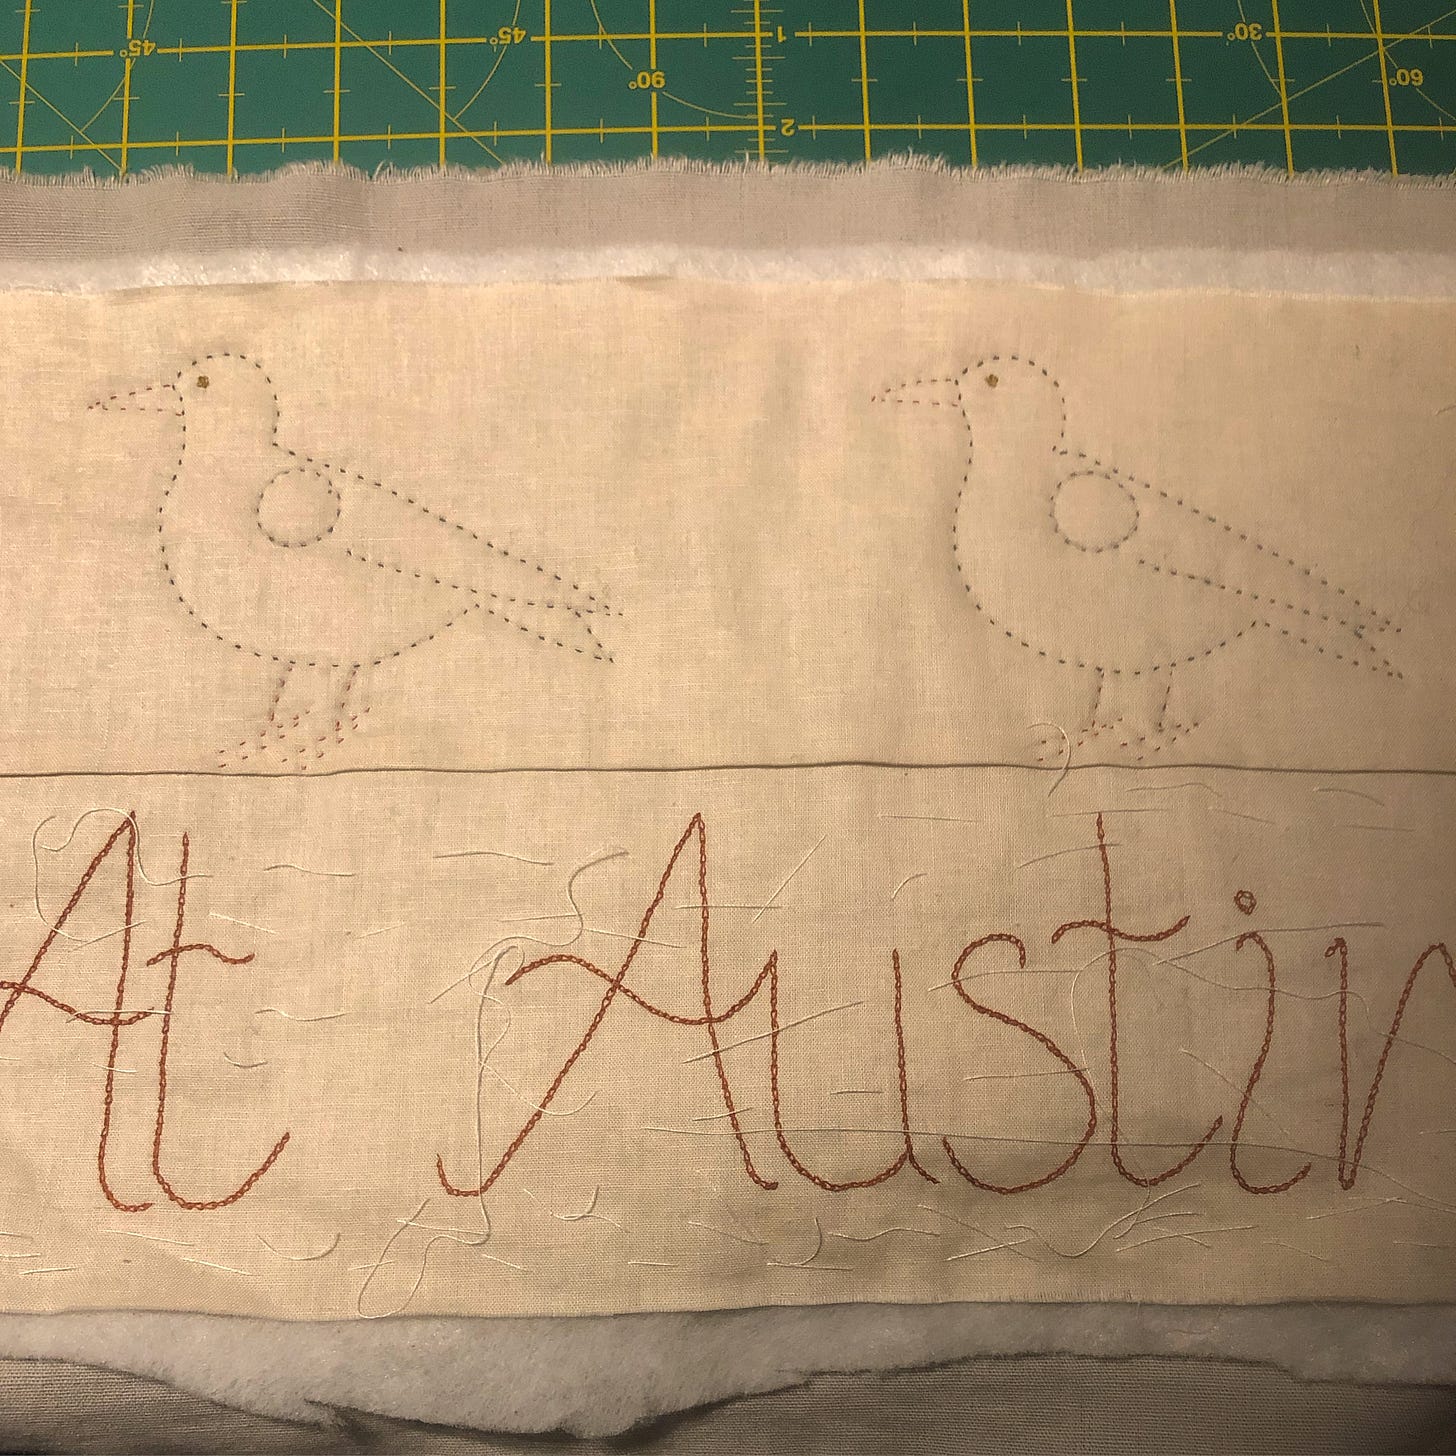 Two birds quilted on to fabric the words “At Austin” embroidered below.